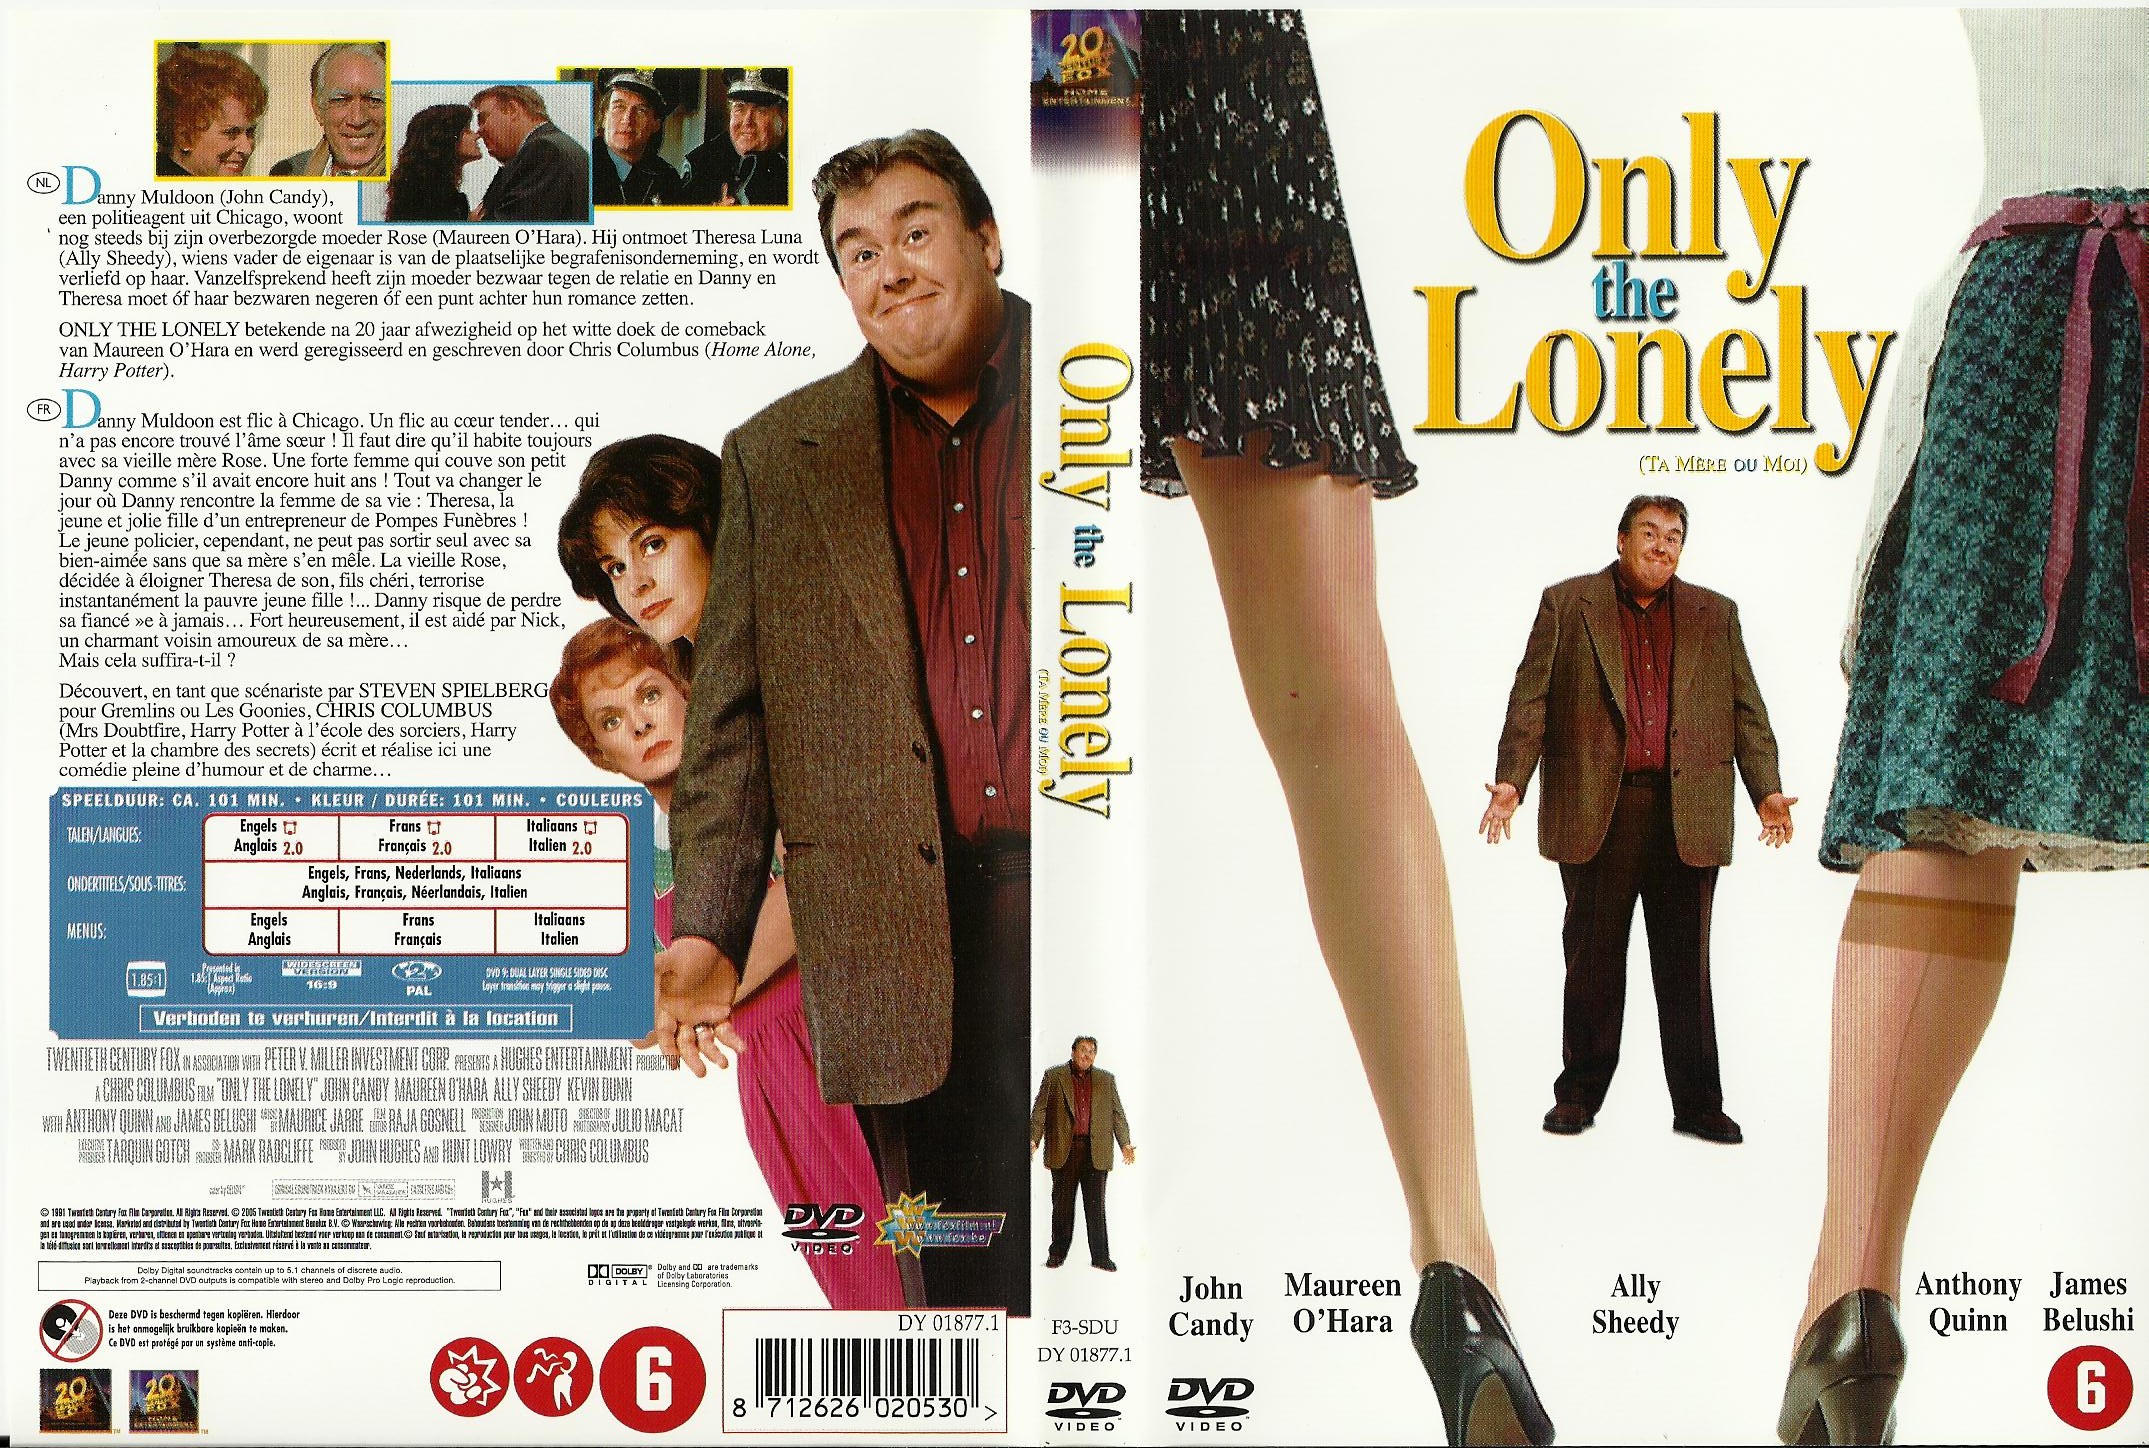 Only the lonely 1991